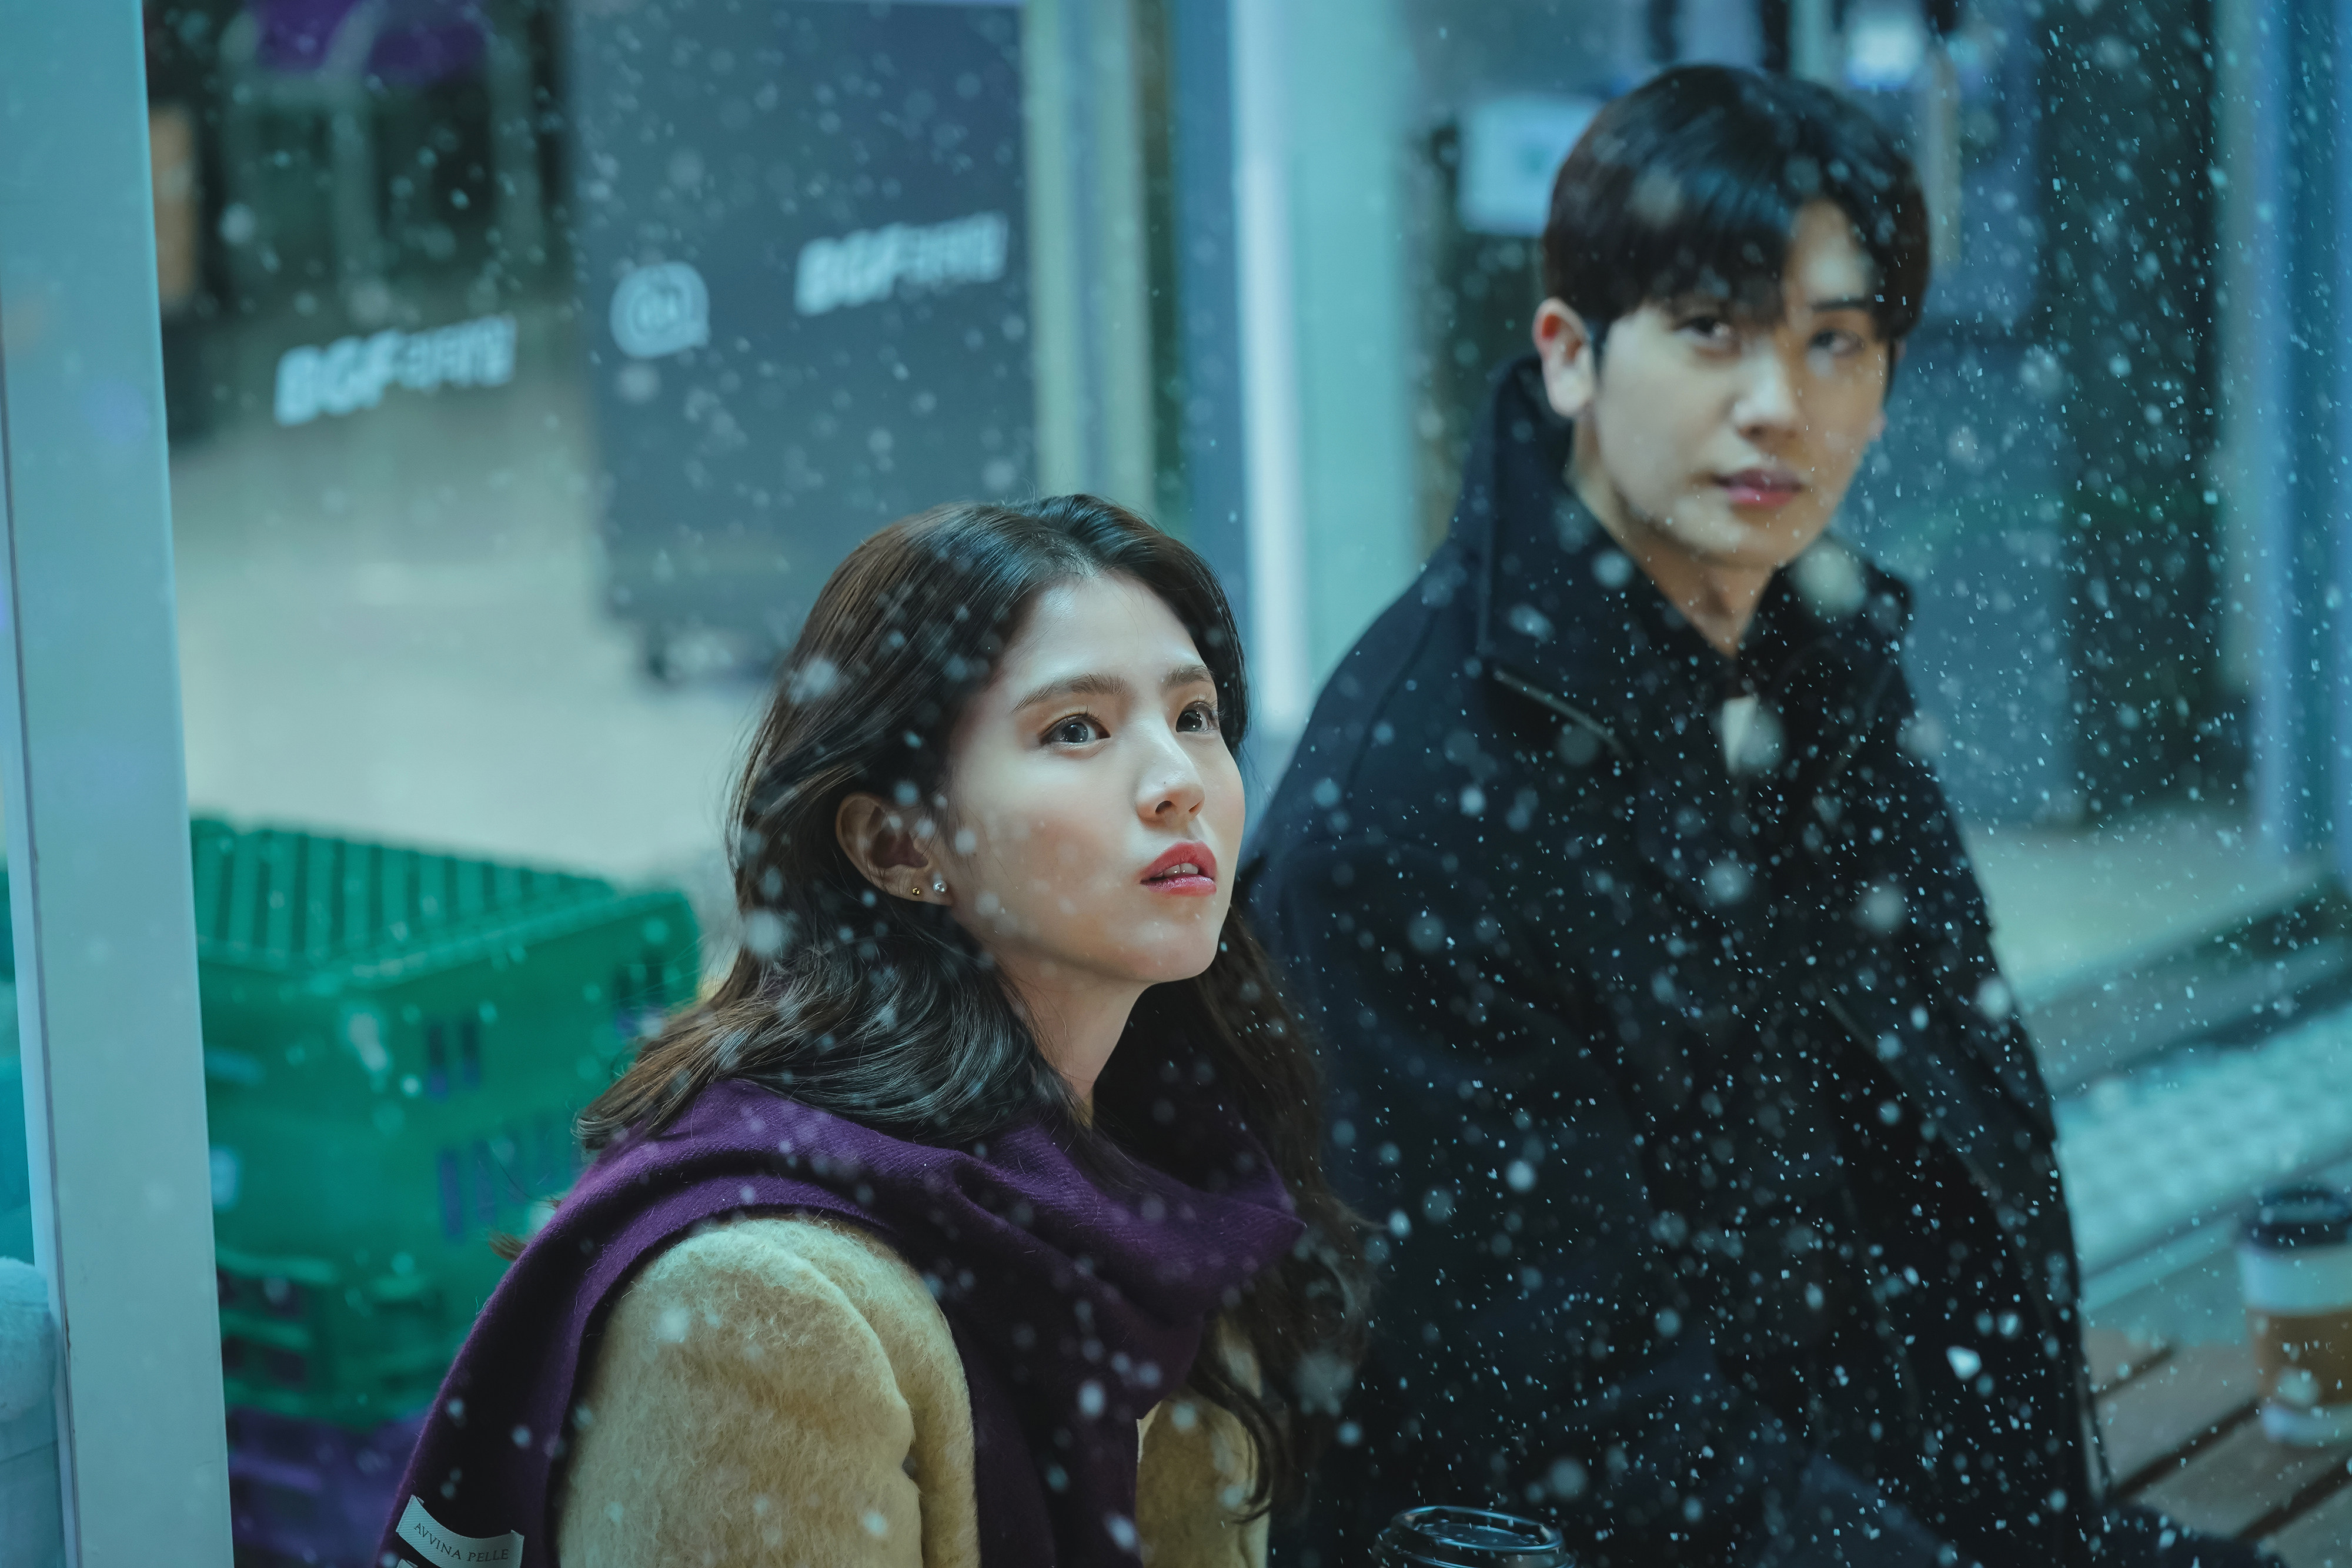 Han So-hee (left) and Park Hyung-sik in a still from Soundtrack #1.